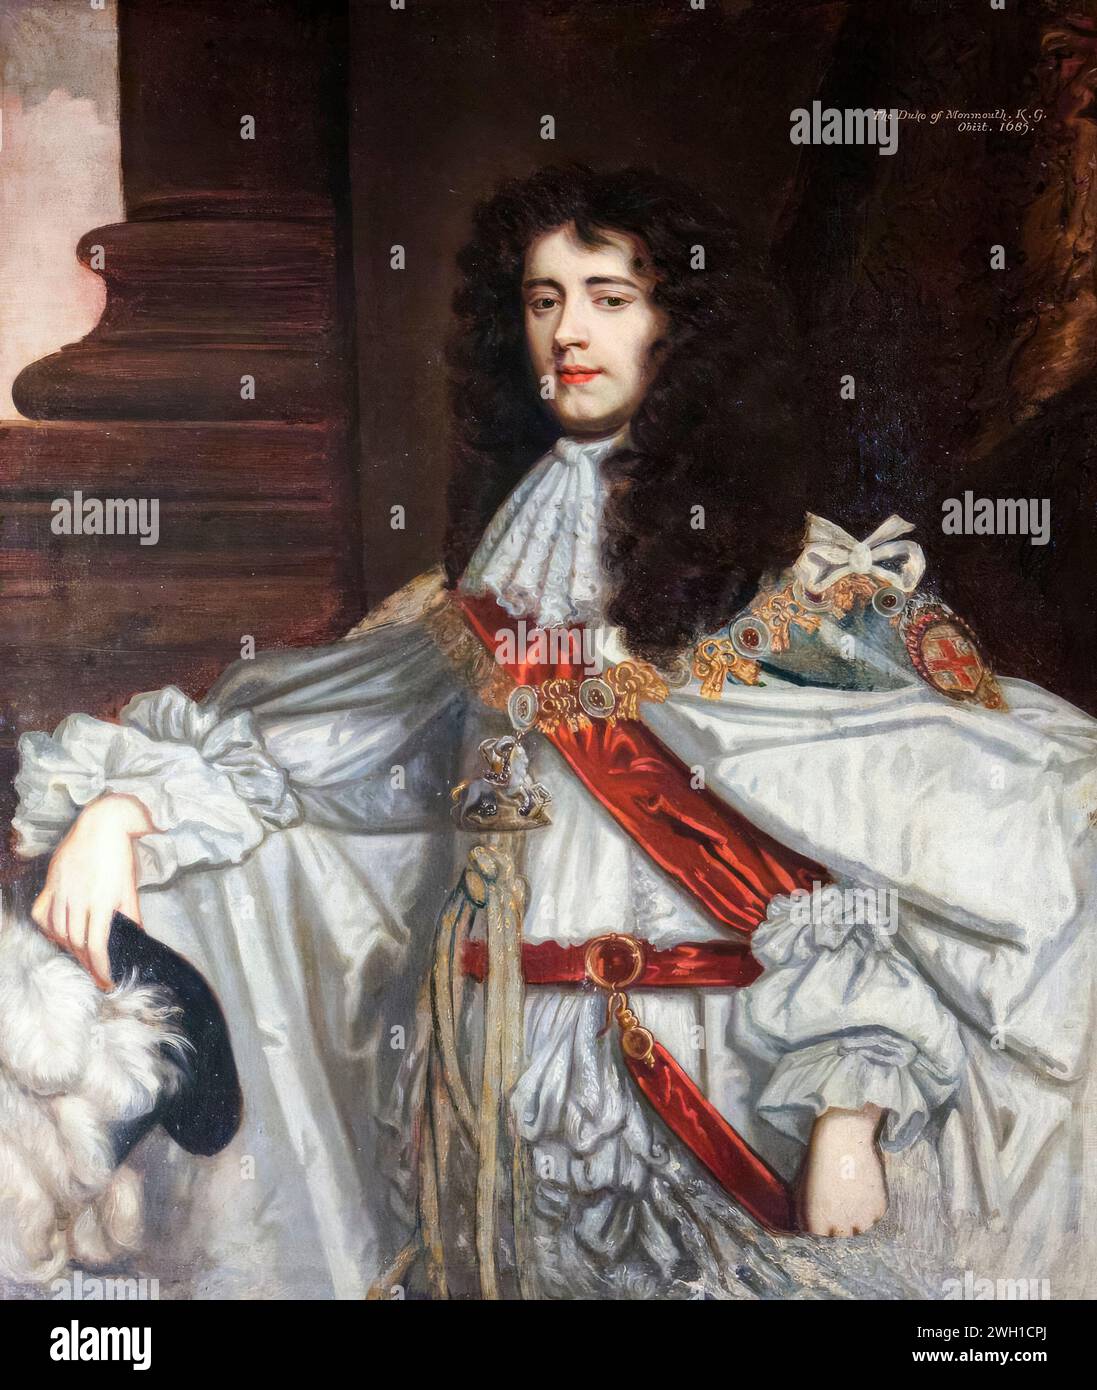 James Scott, 1st Duke of Monmouth, 1st Duke of Buccleuch (1649-1685), Dutch-born English nobleman and military officer, portrait painting in oil on canvas by Sir Peter Lely, circa 1682 Stock Photo